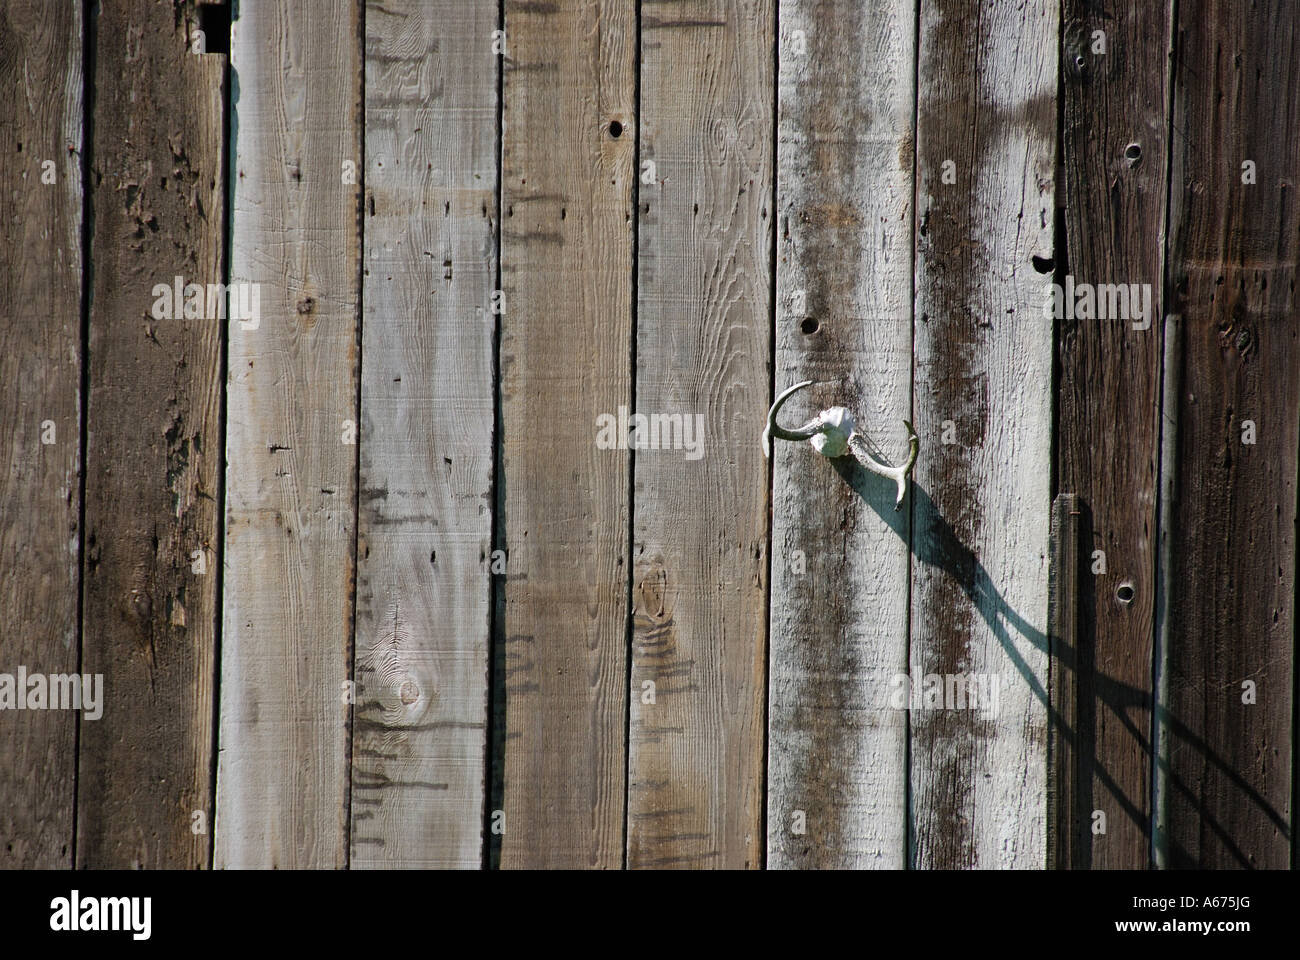 'Wall of 'old barn' with 'deer antlers', 'Sonoma county', California' Stock Photo